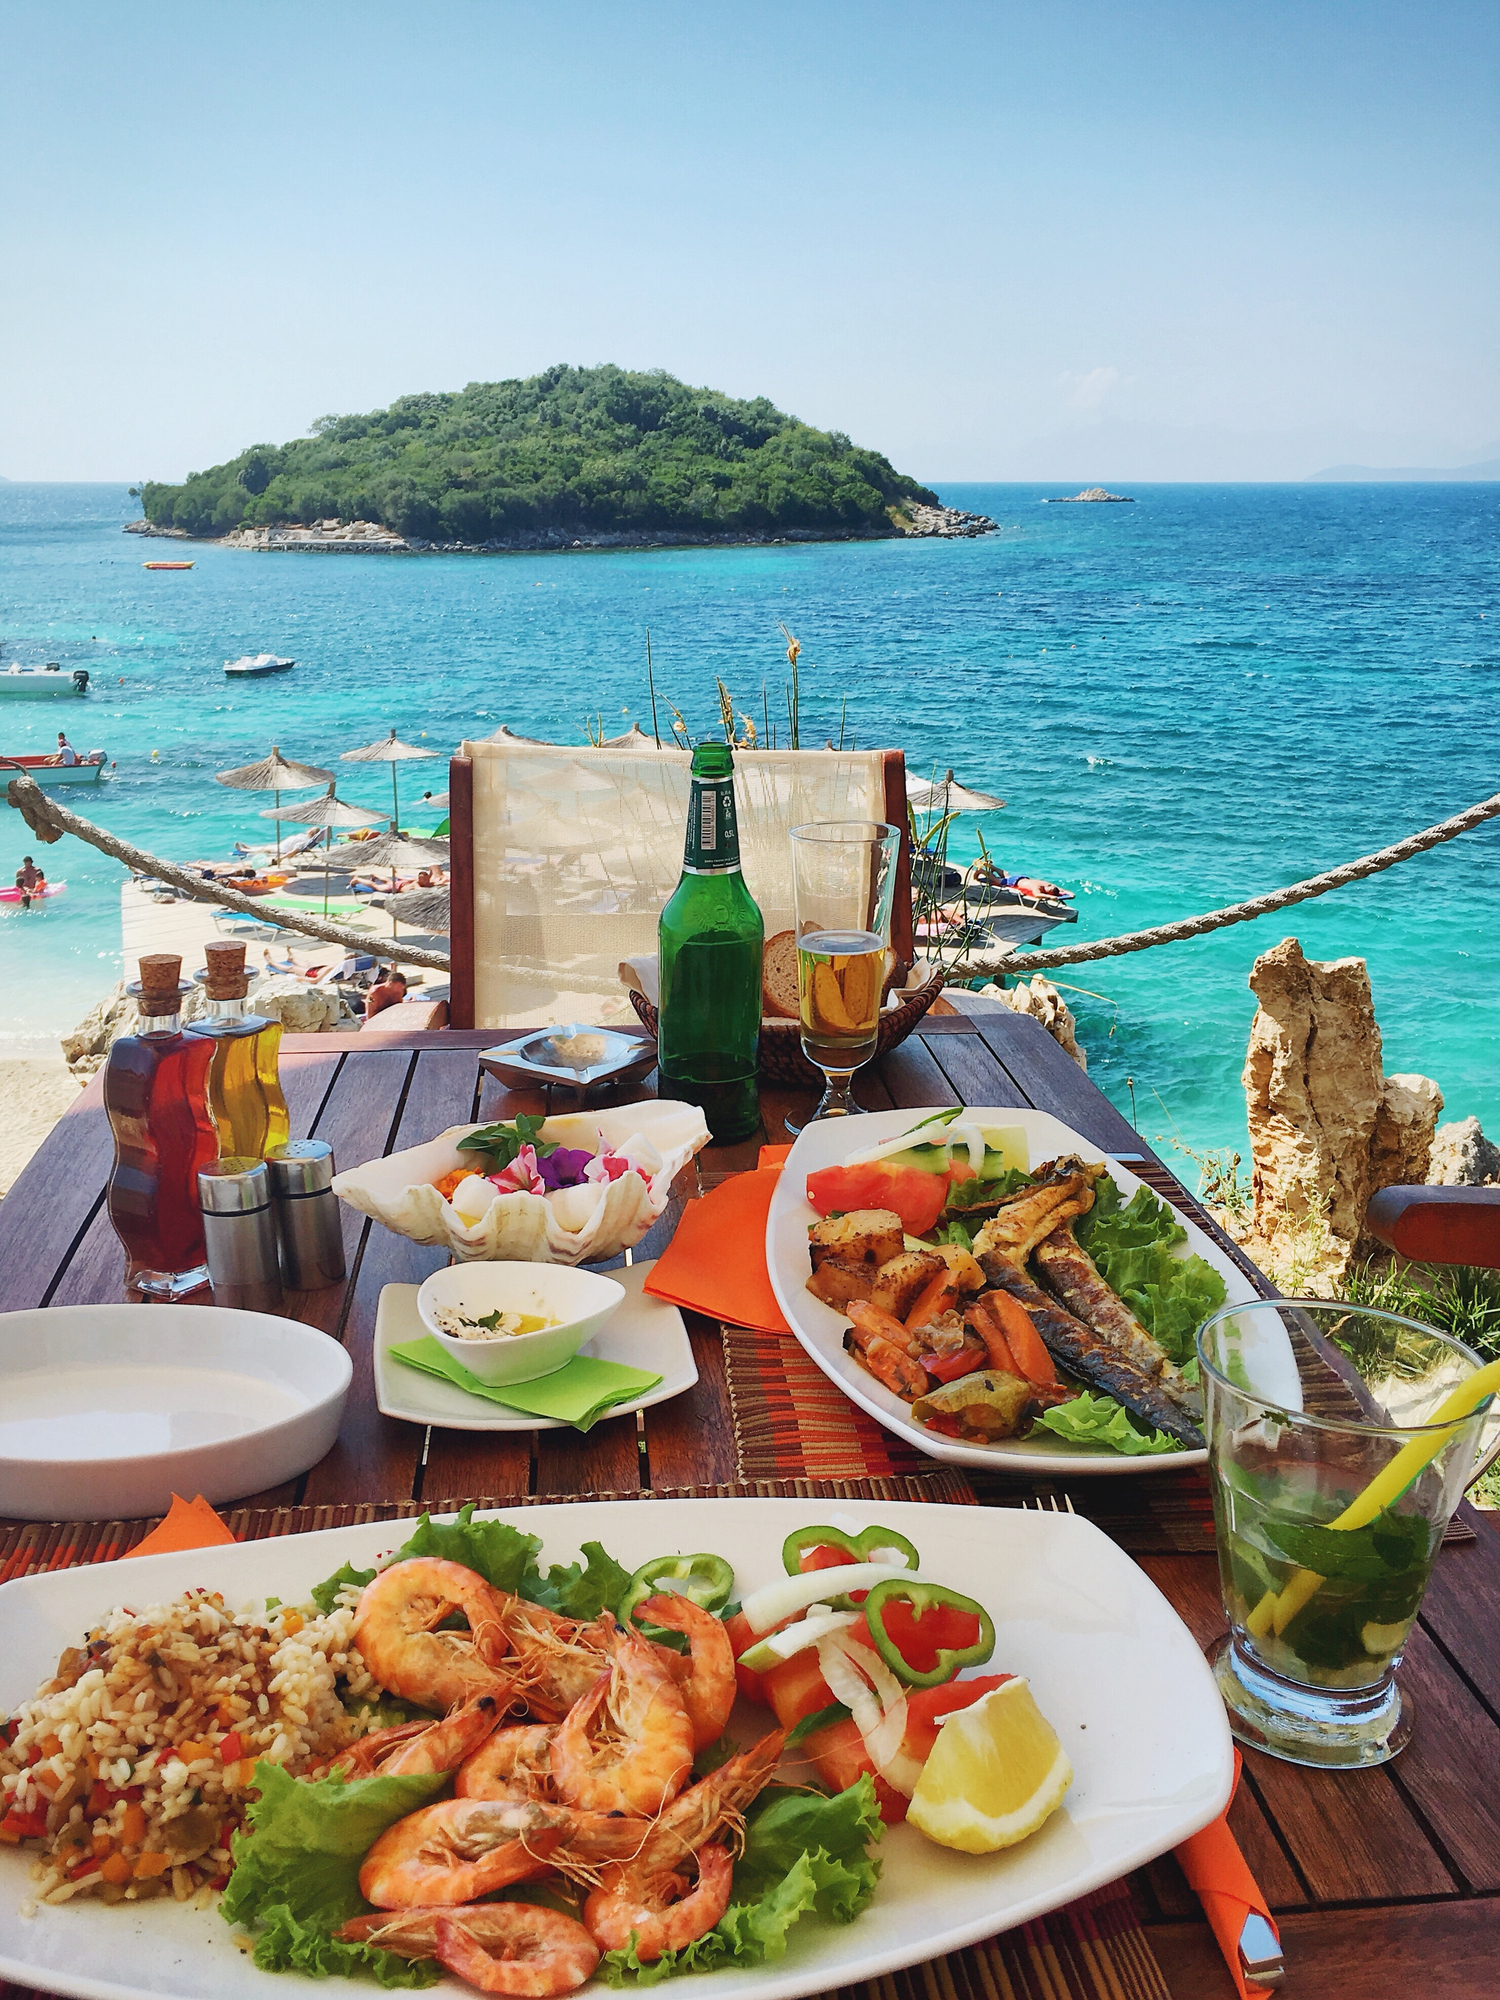 Seafood meal with a tropical island view